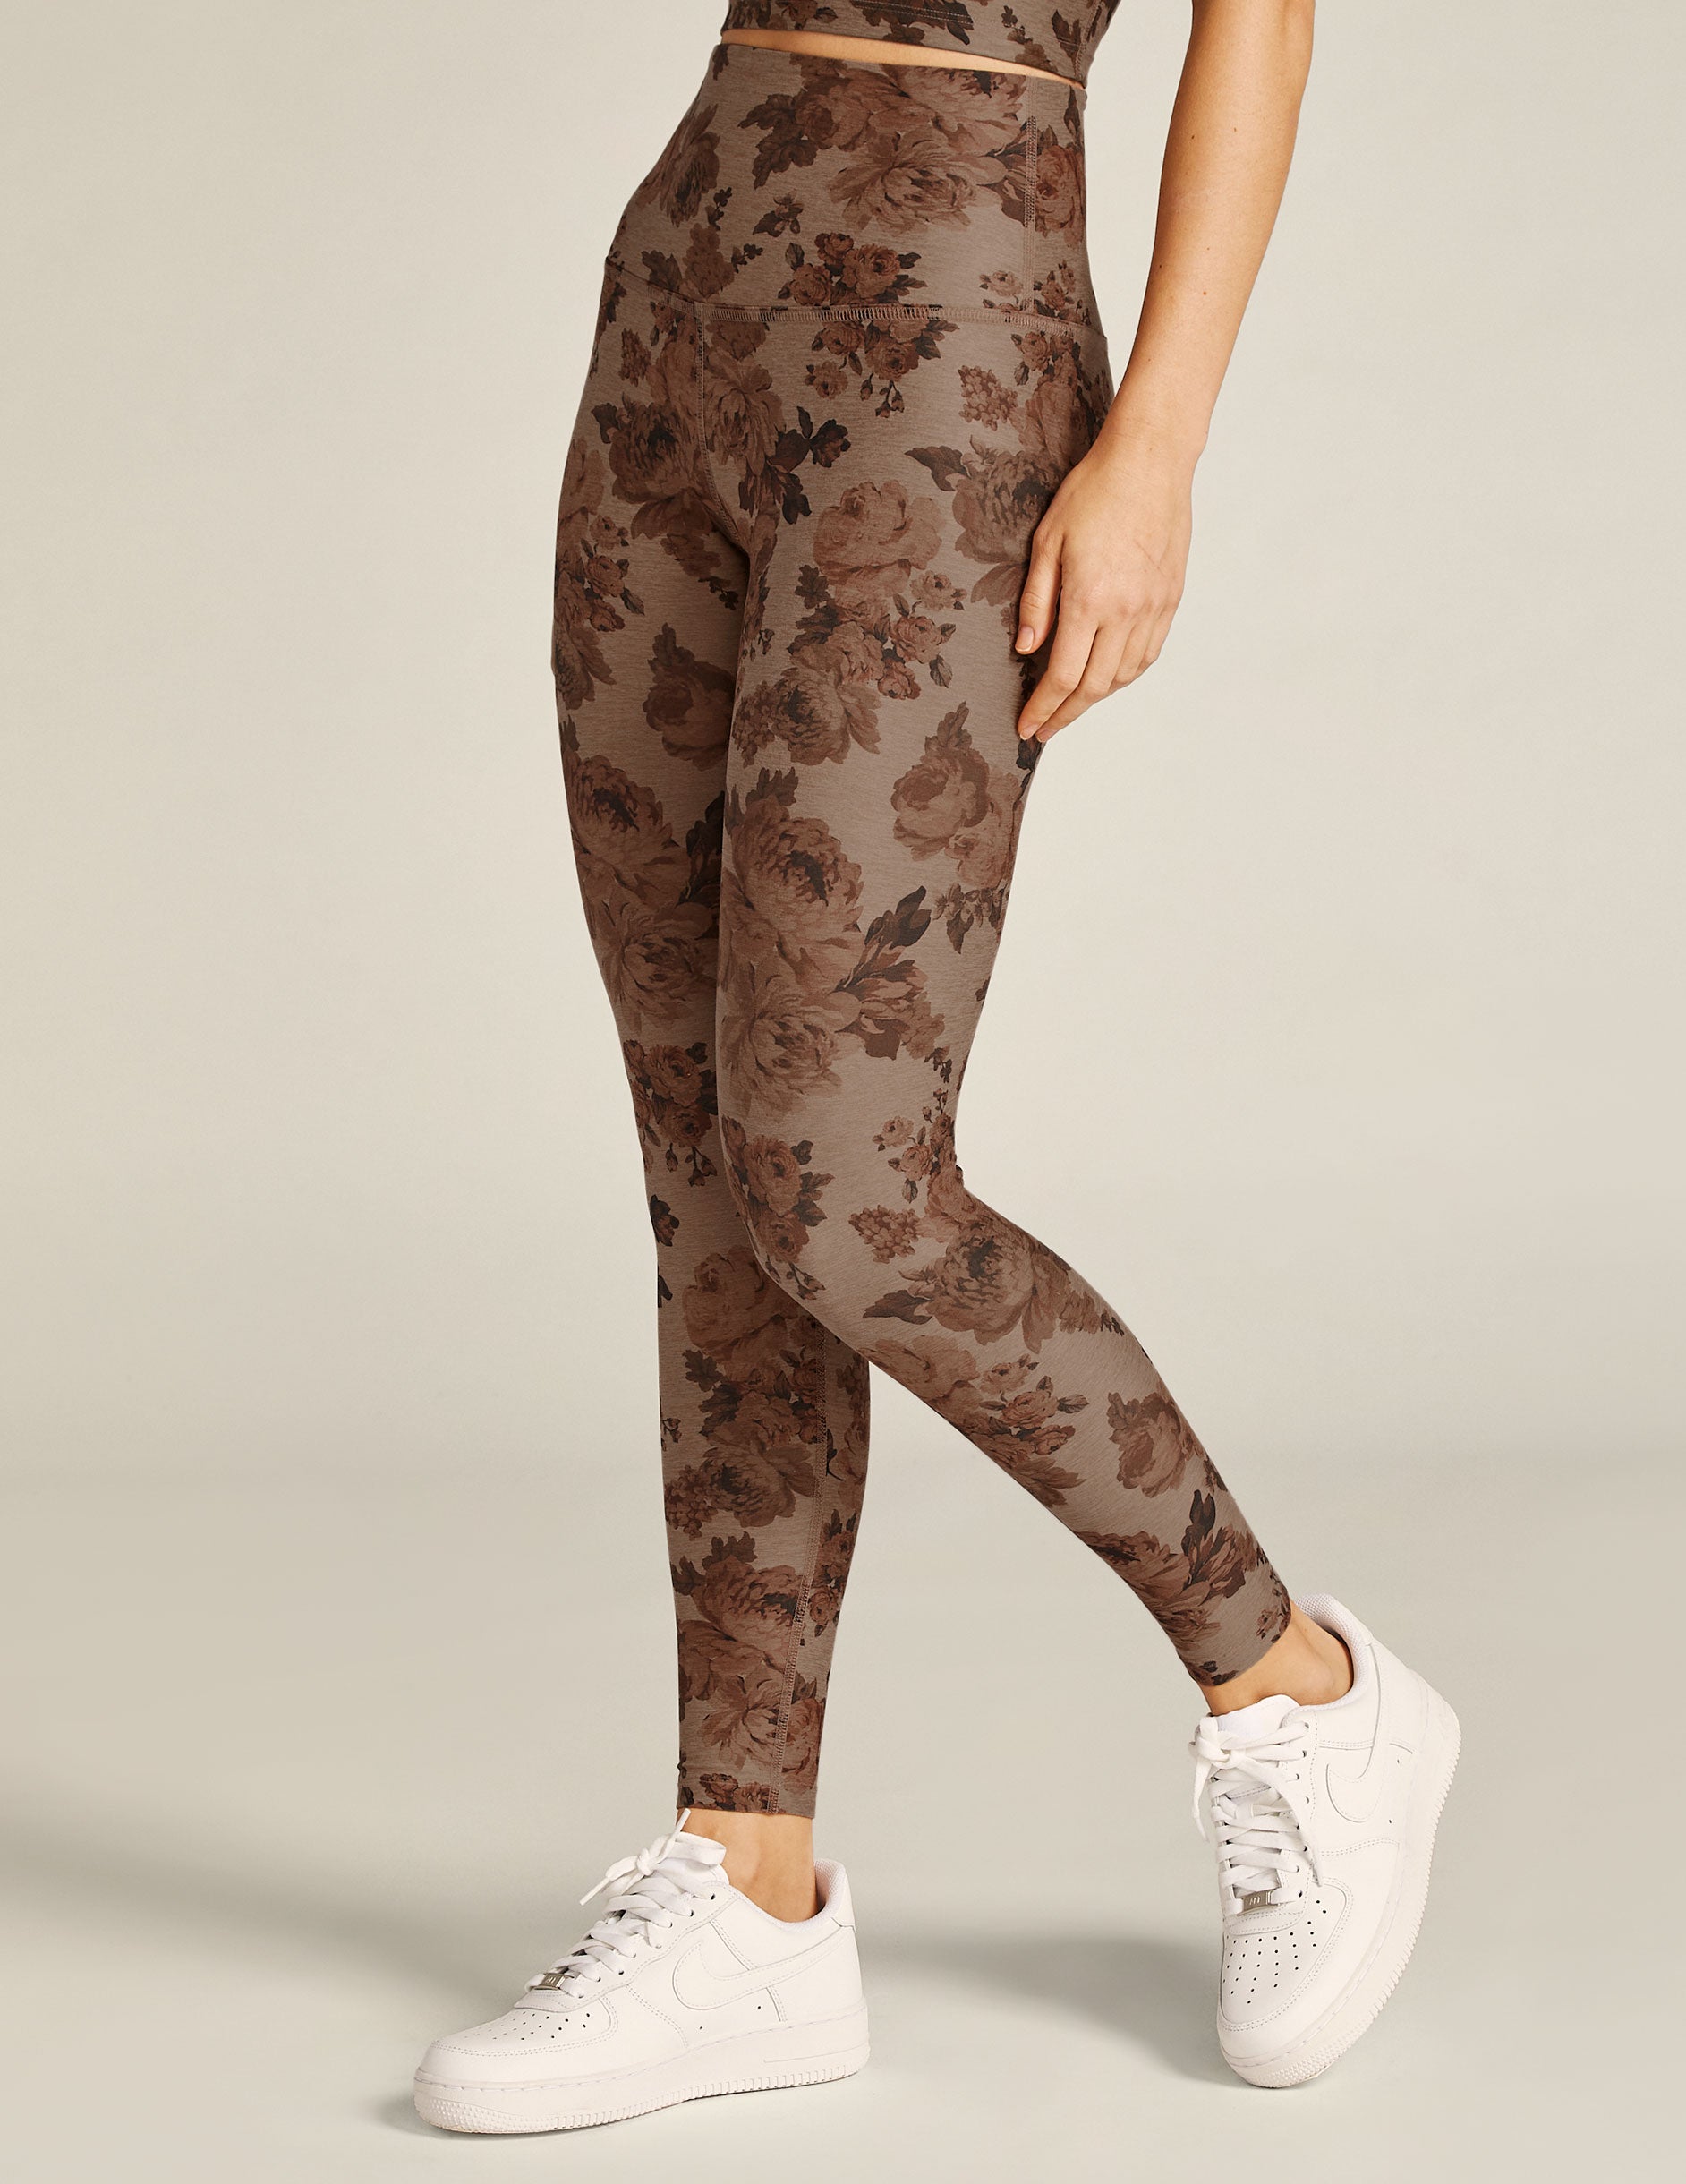 Buy High Star Printed Trousers online - 1 products | FASHIOLA INDIA